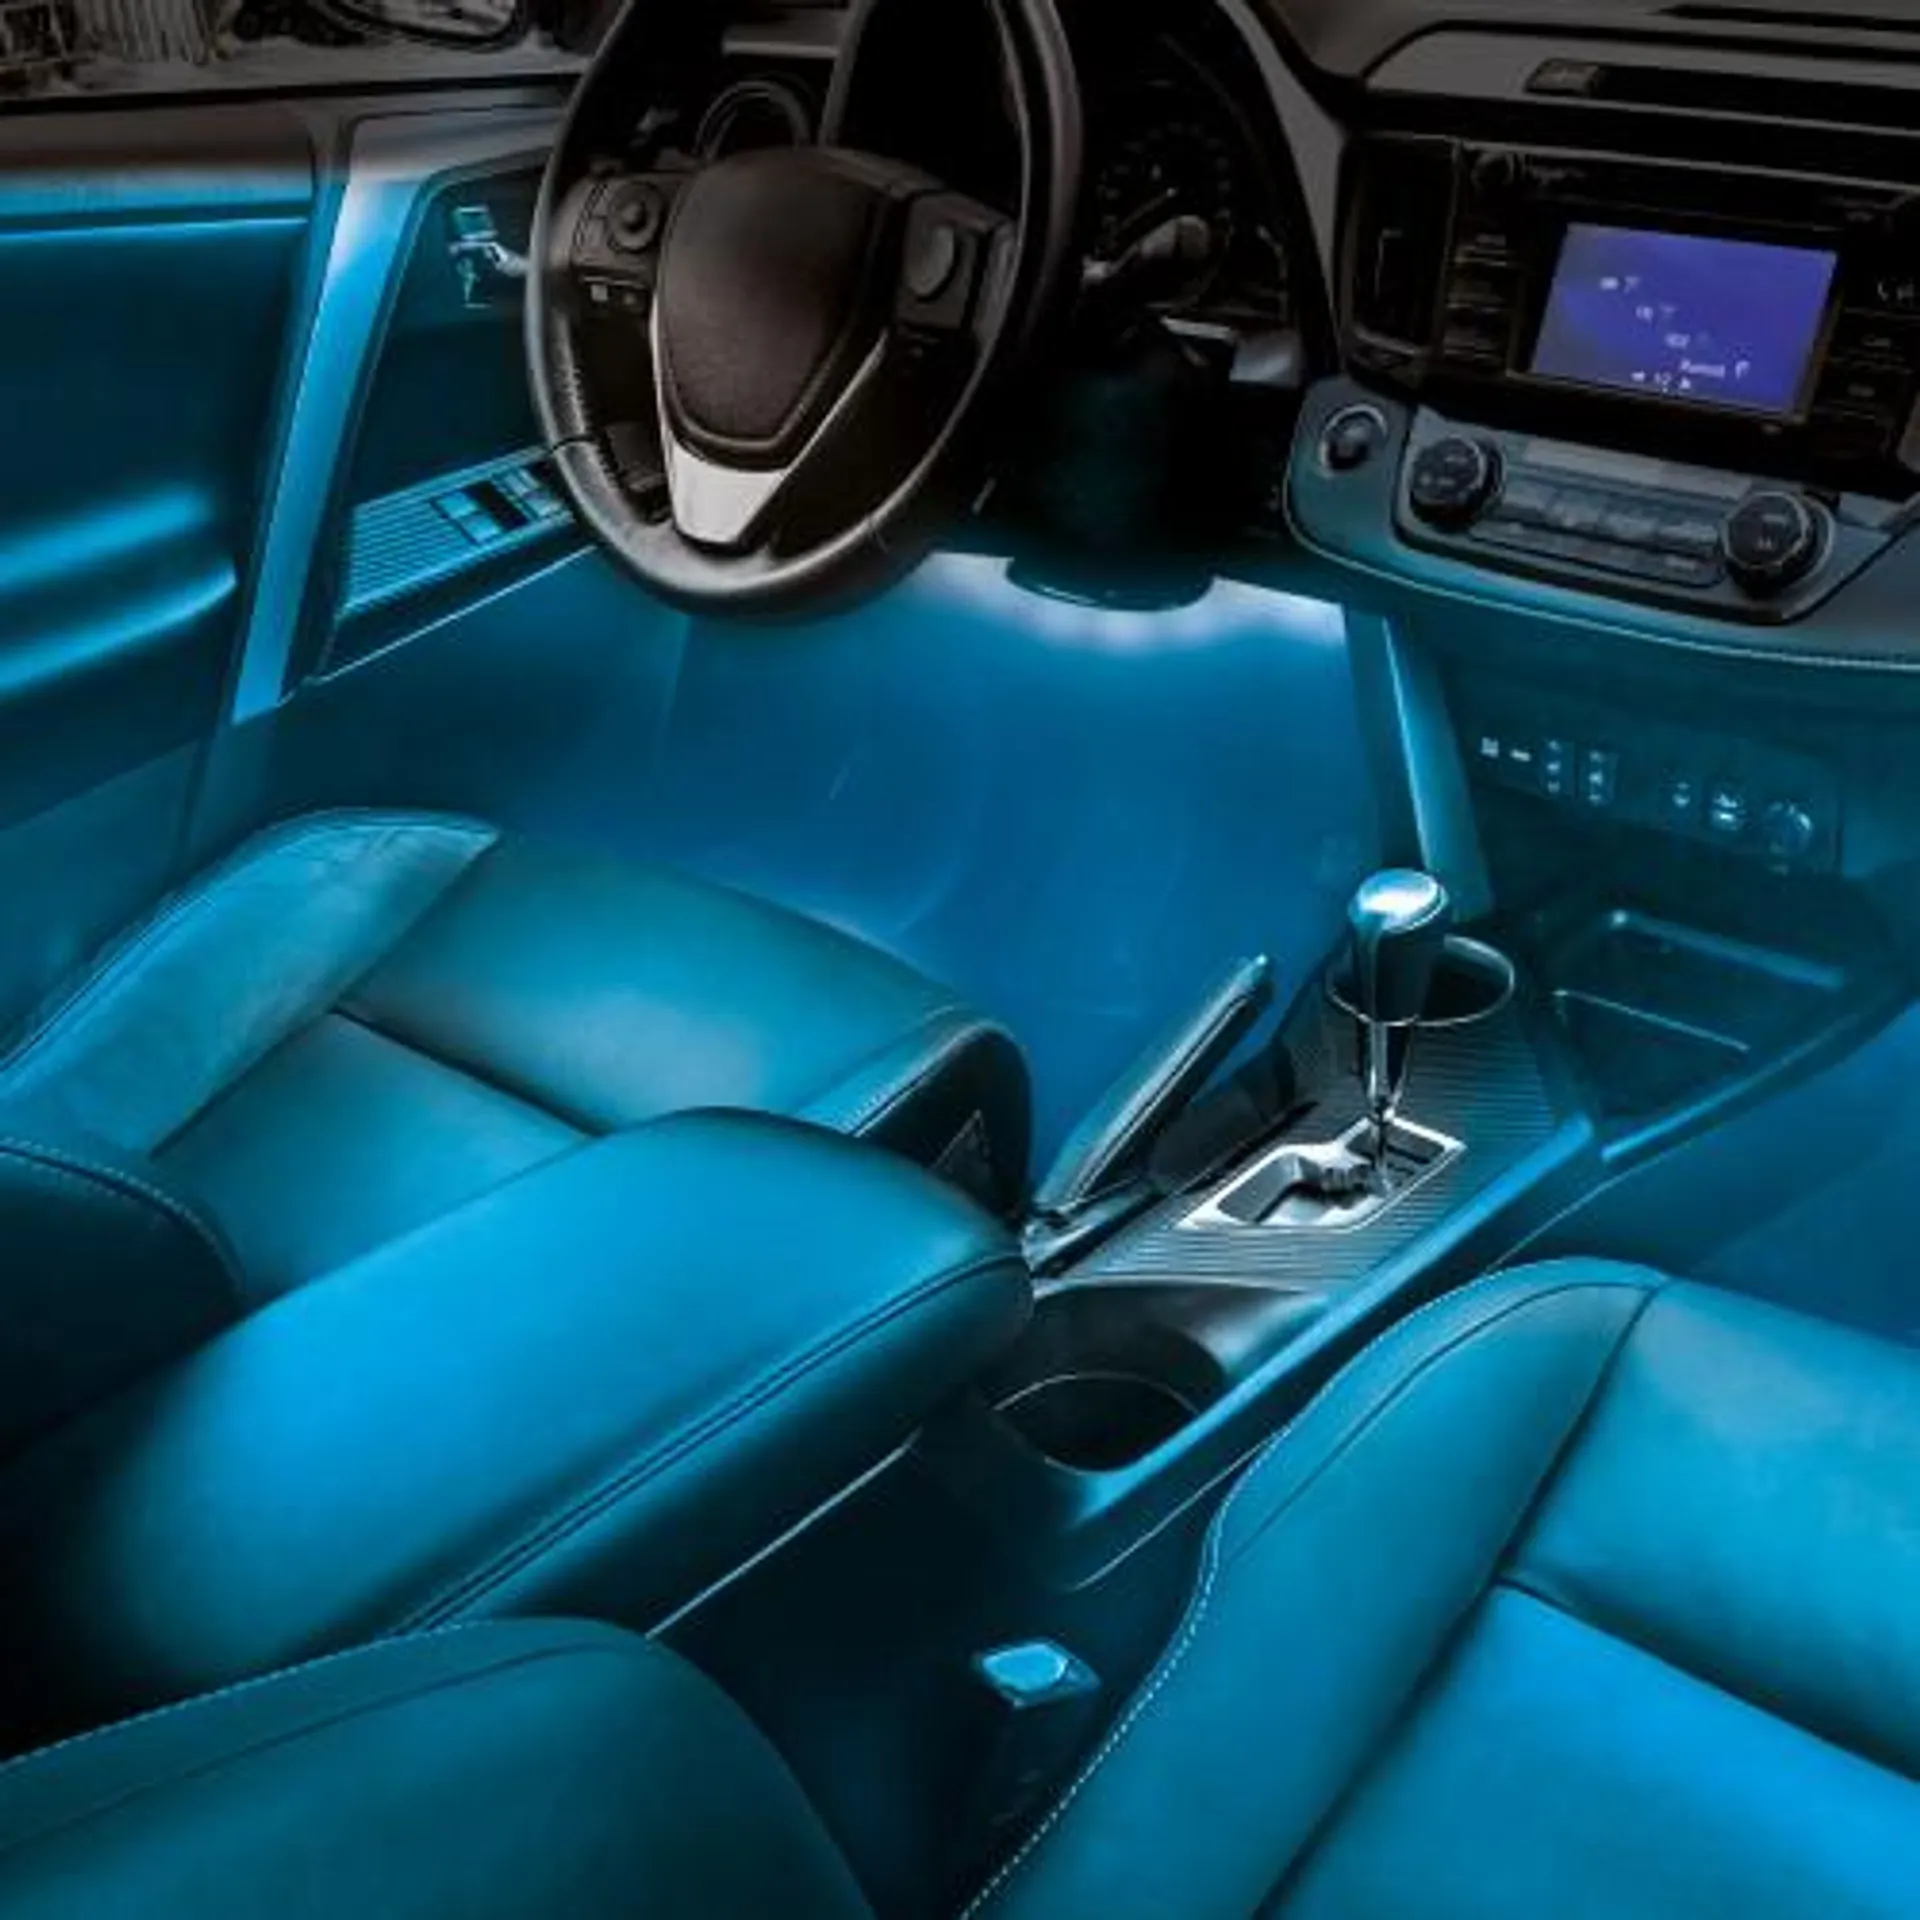 Colour-Changing Car Atmosphere LED Lights